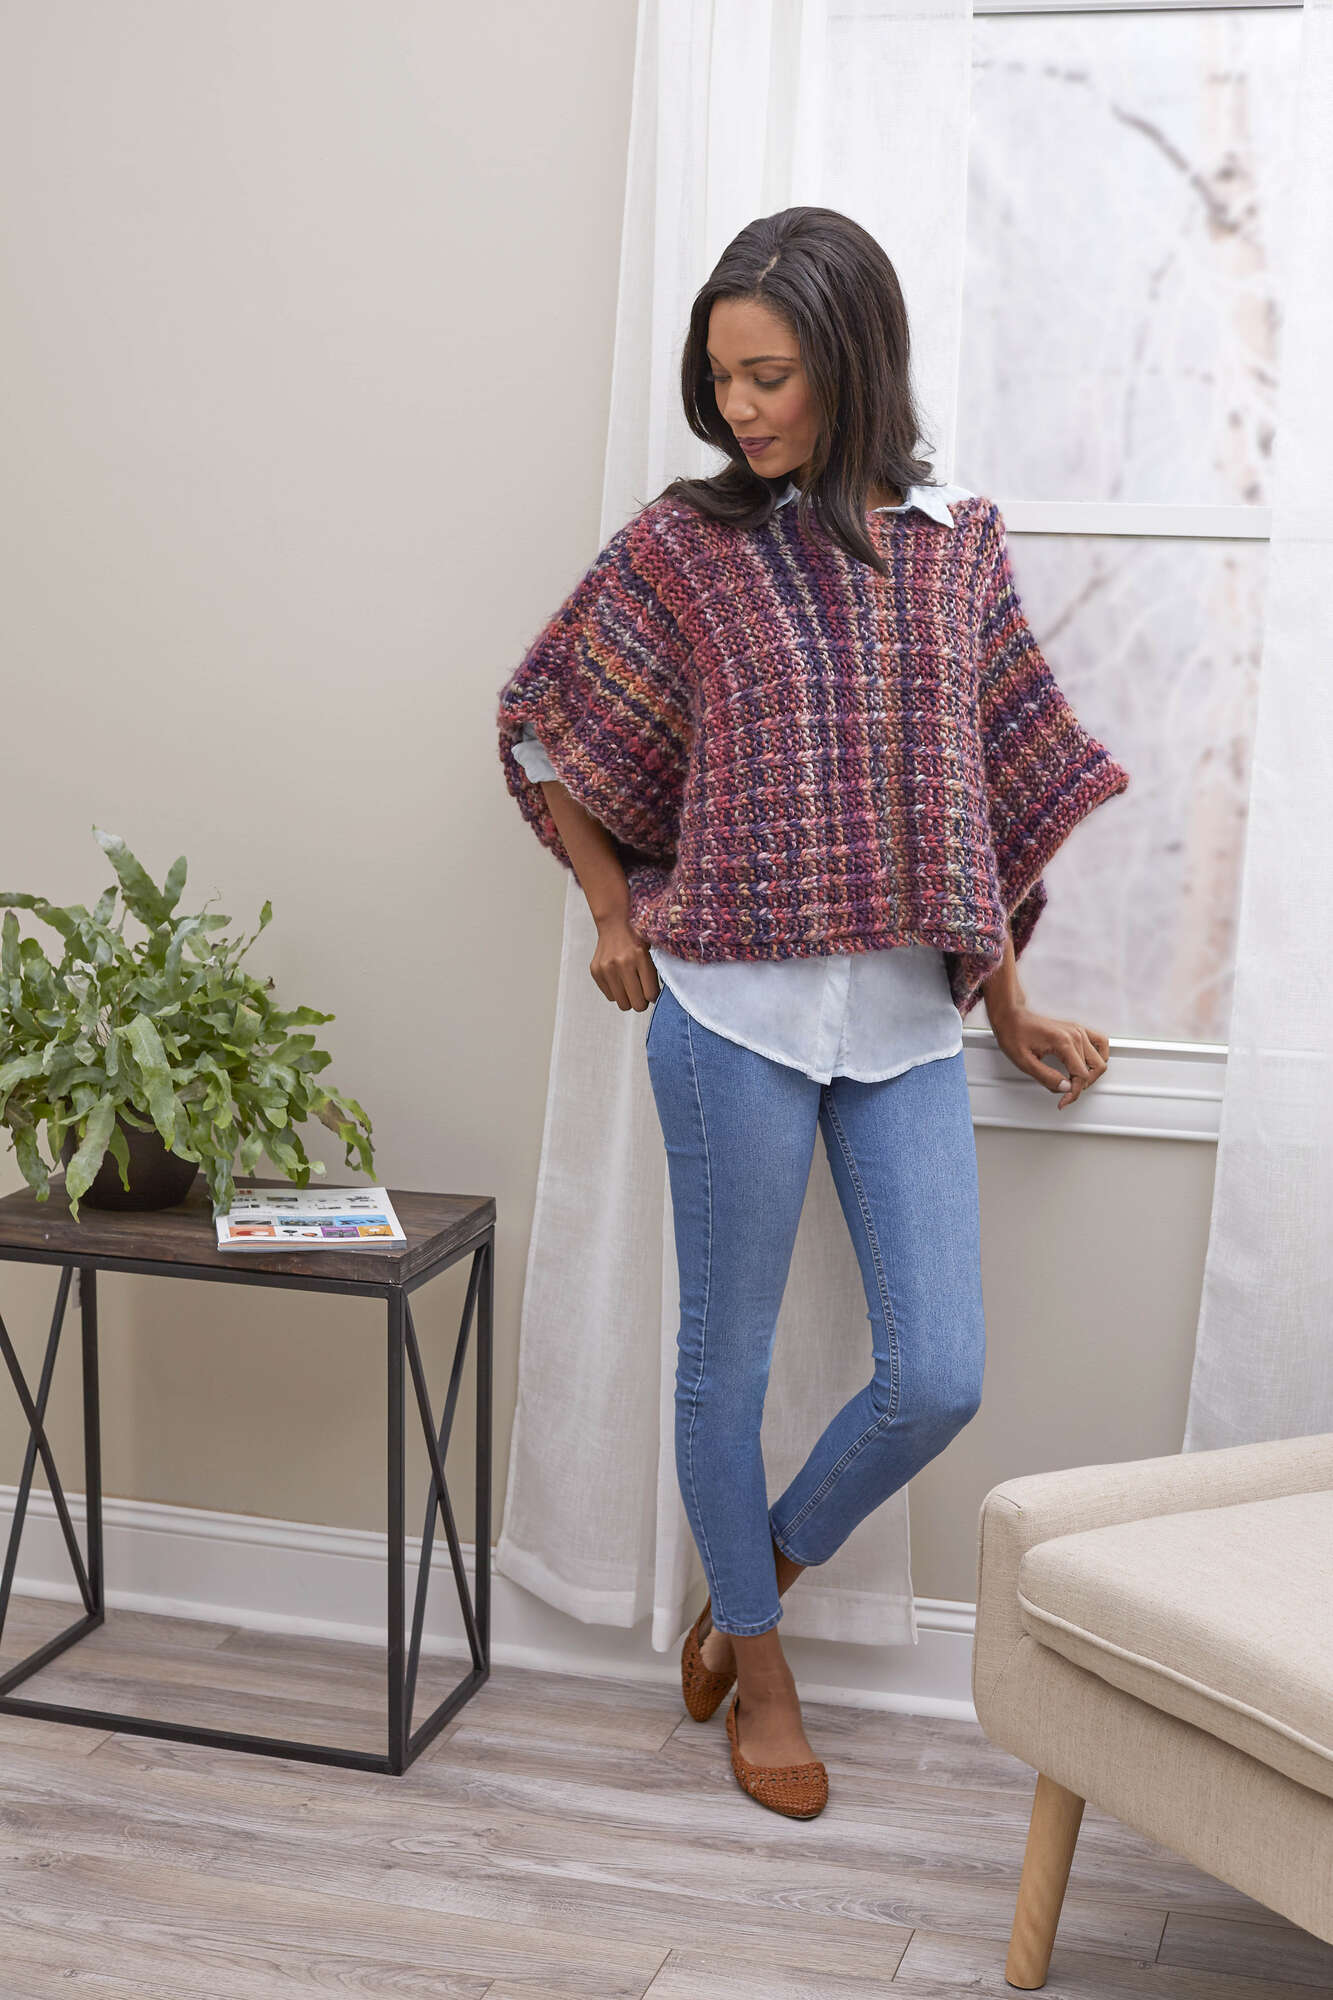 Free Red Heart Easy Boat Neck Poncho Pattern